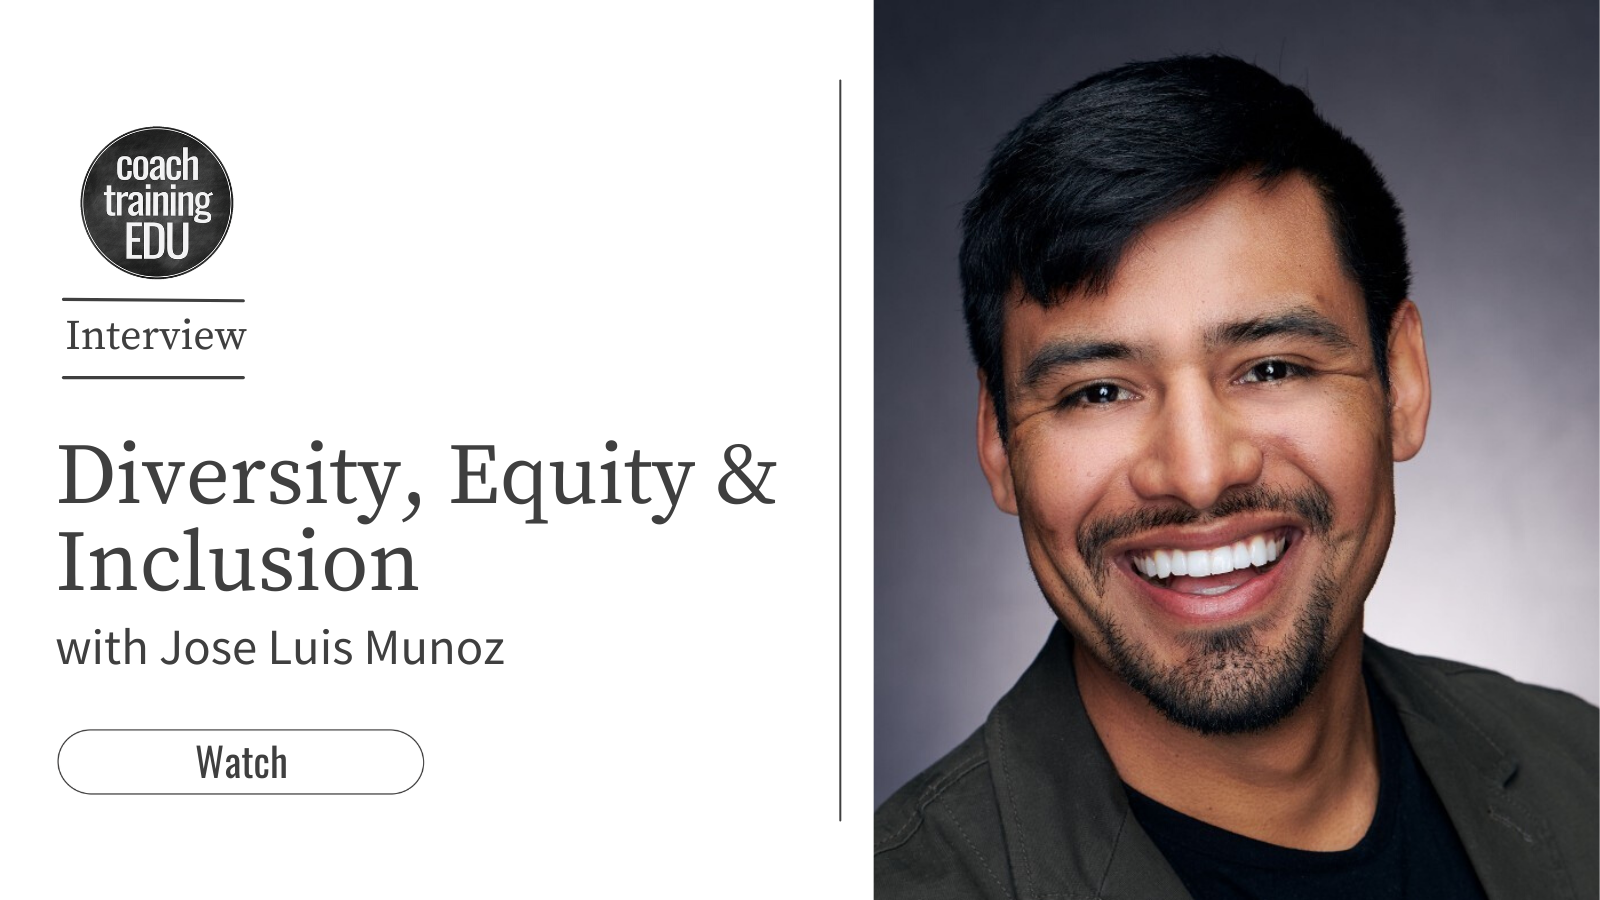 Diversity, Equity & Inclusion with Jose Luis Munoz
